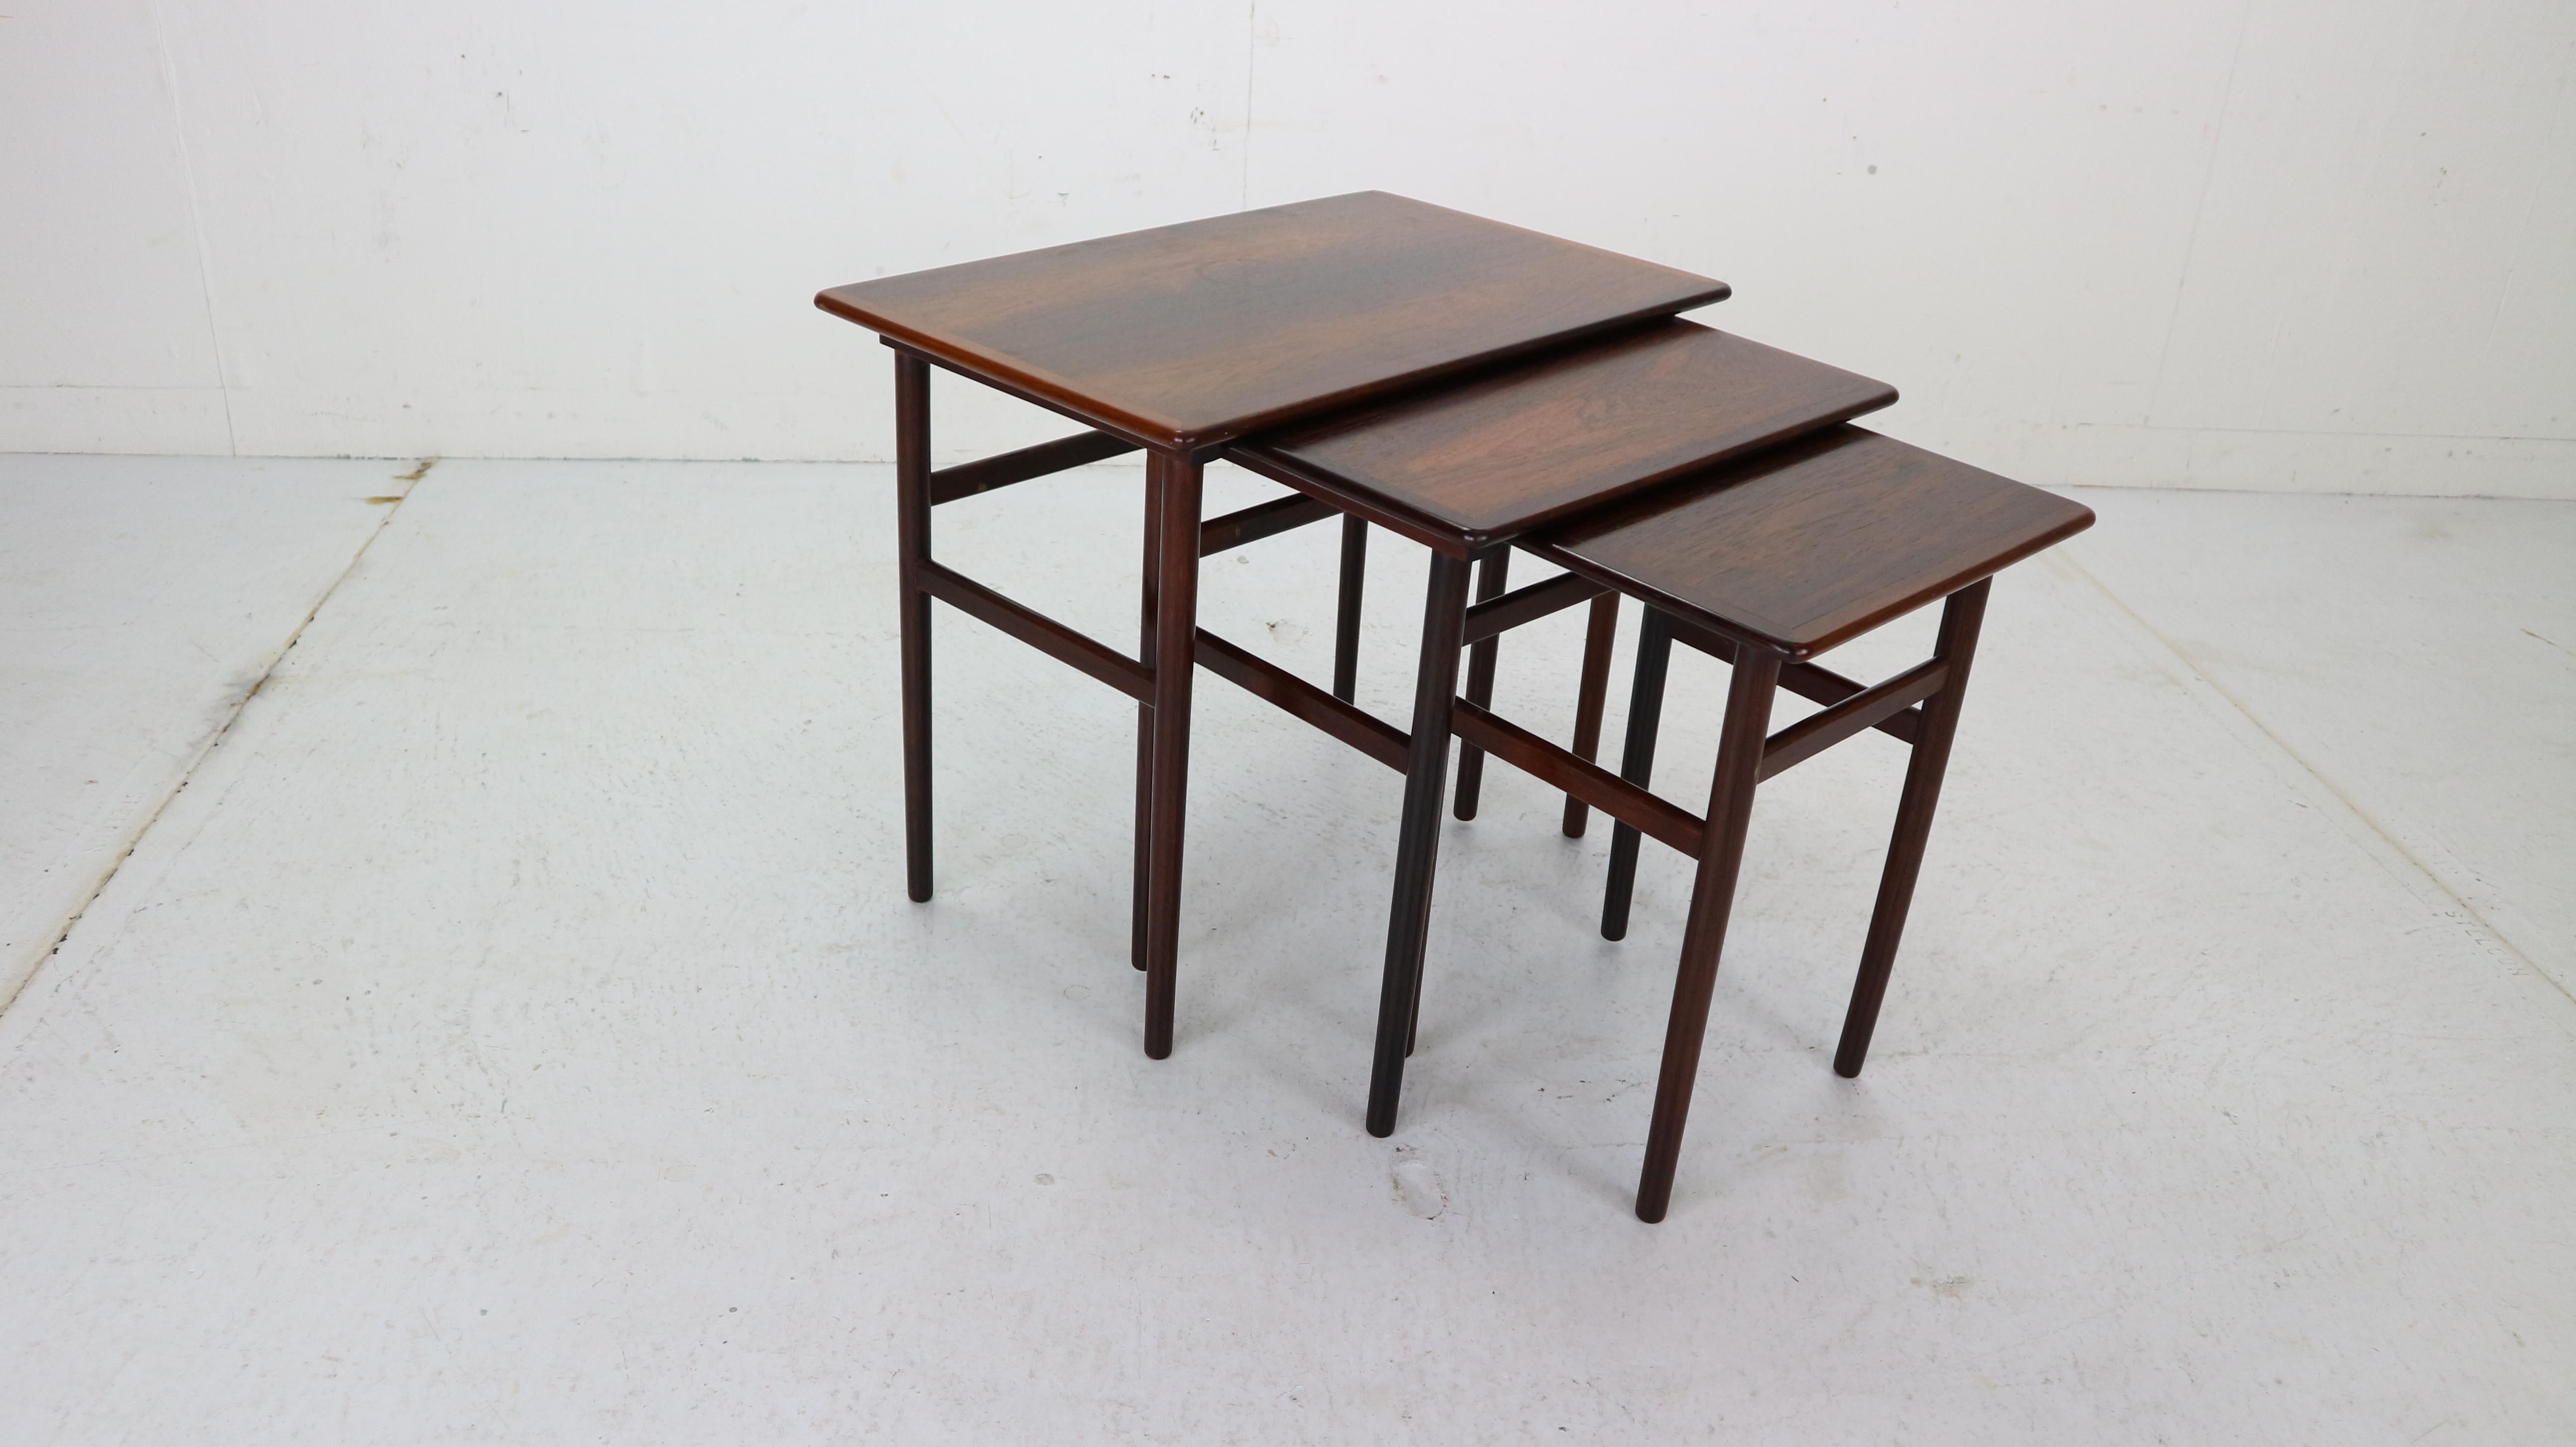 Set of 3 Danish nesting tables from the 1960s period, Denmark.
The tables are made of rosewood and can be pushed into one another on small strips of wood.
Original condition.
Measurements:
Large L 39 x W 60 x H 50cm.
Medium L 34 x W 47 x H